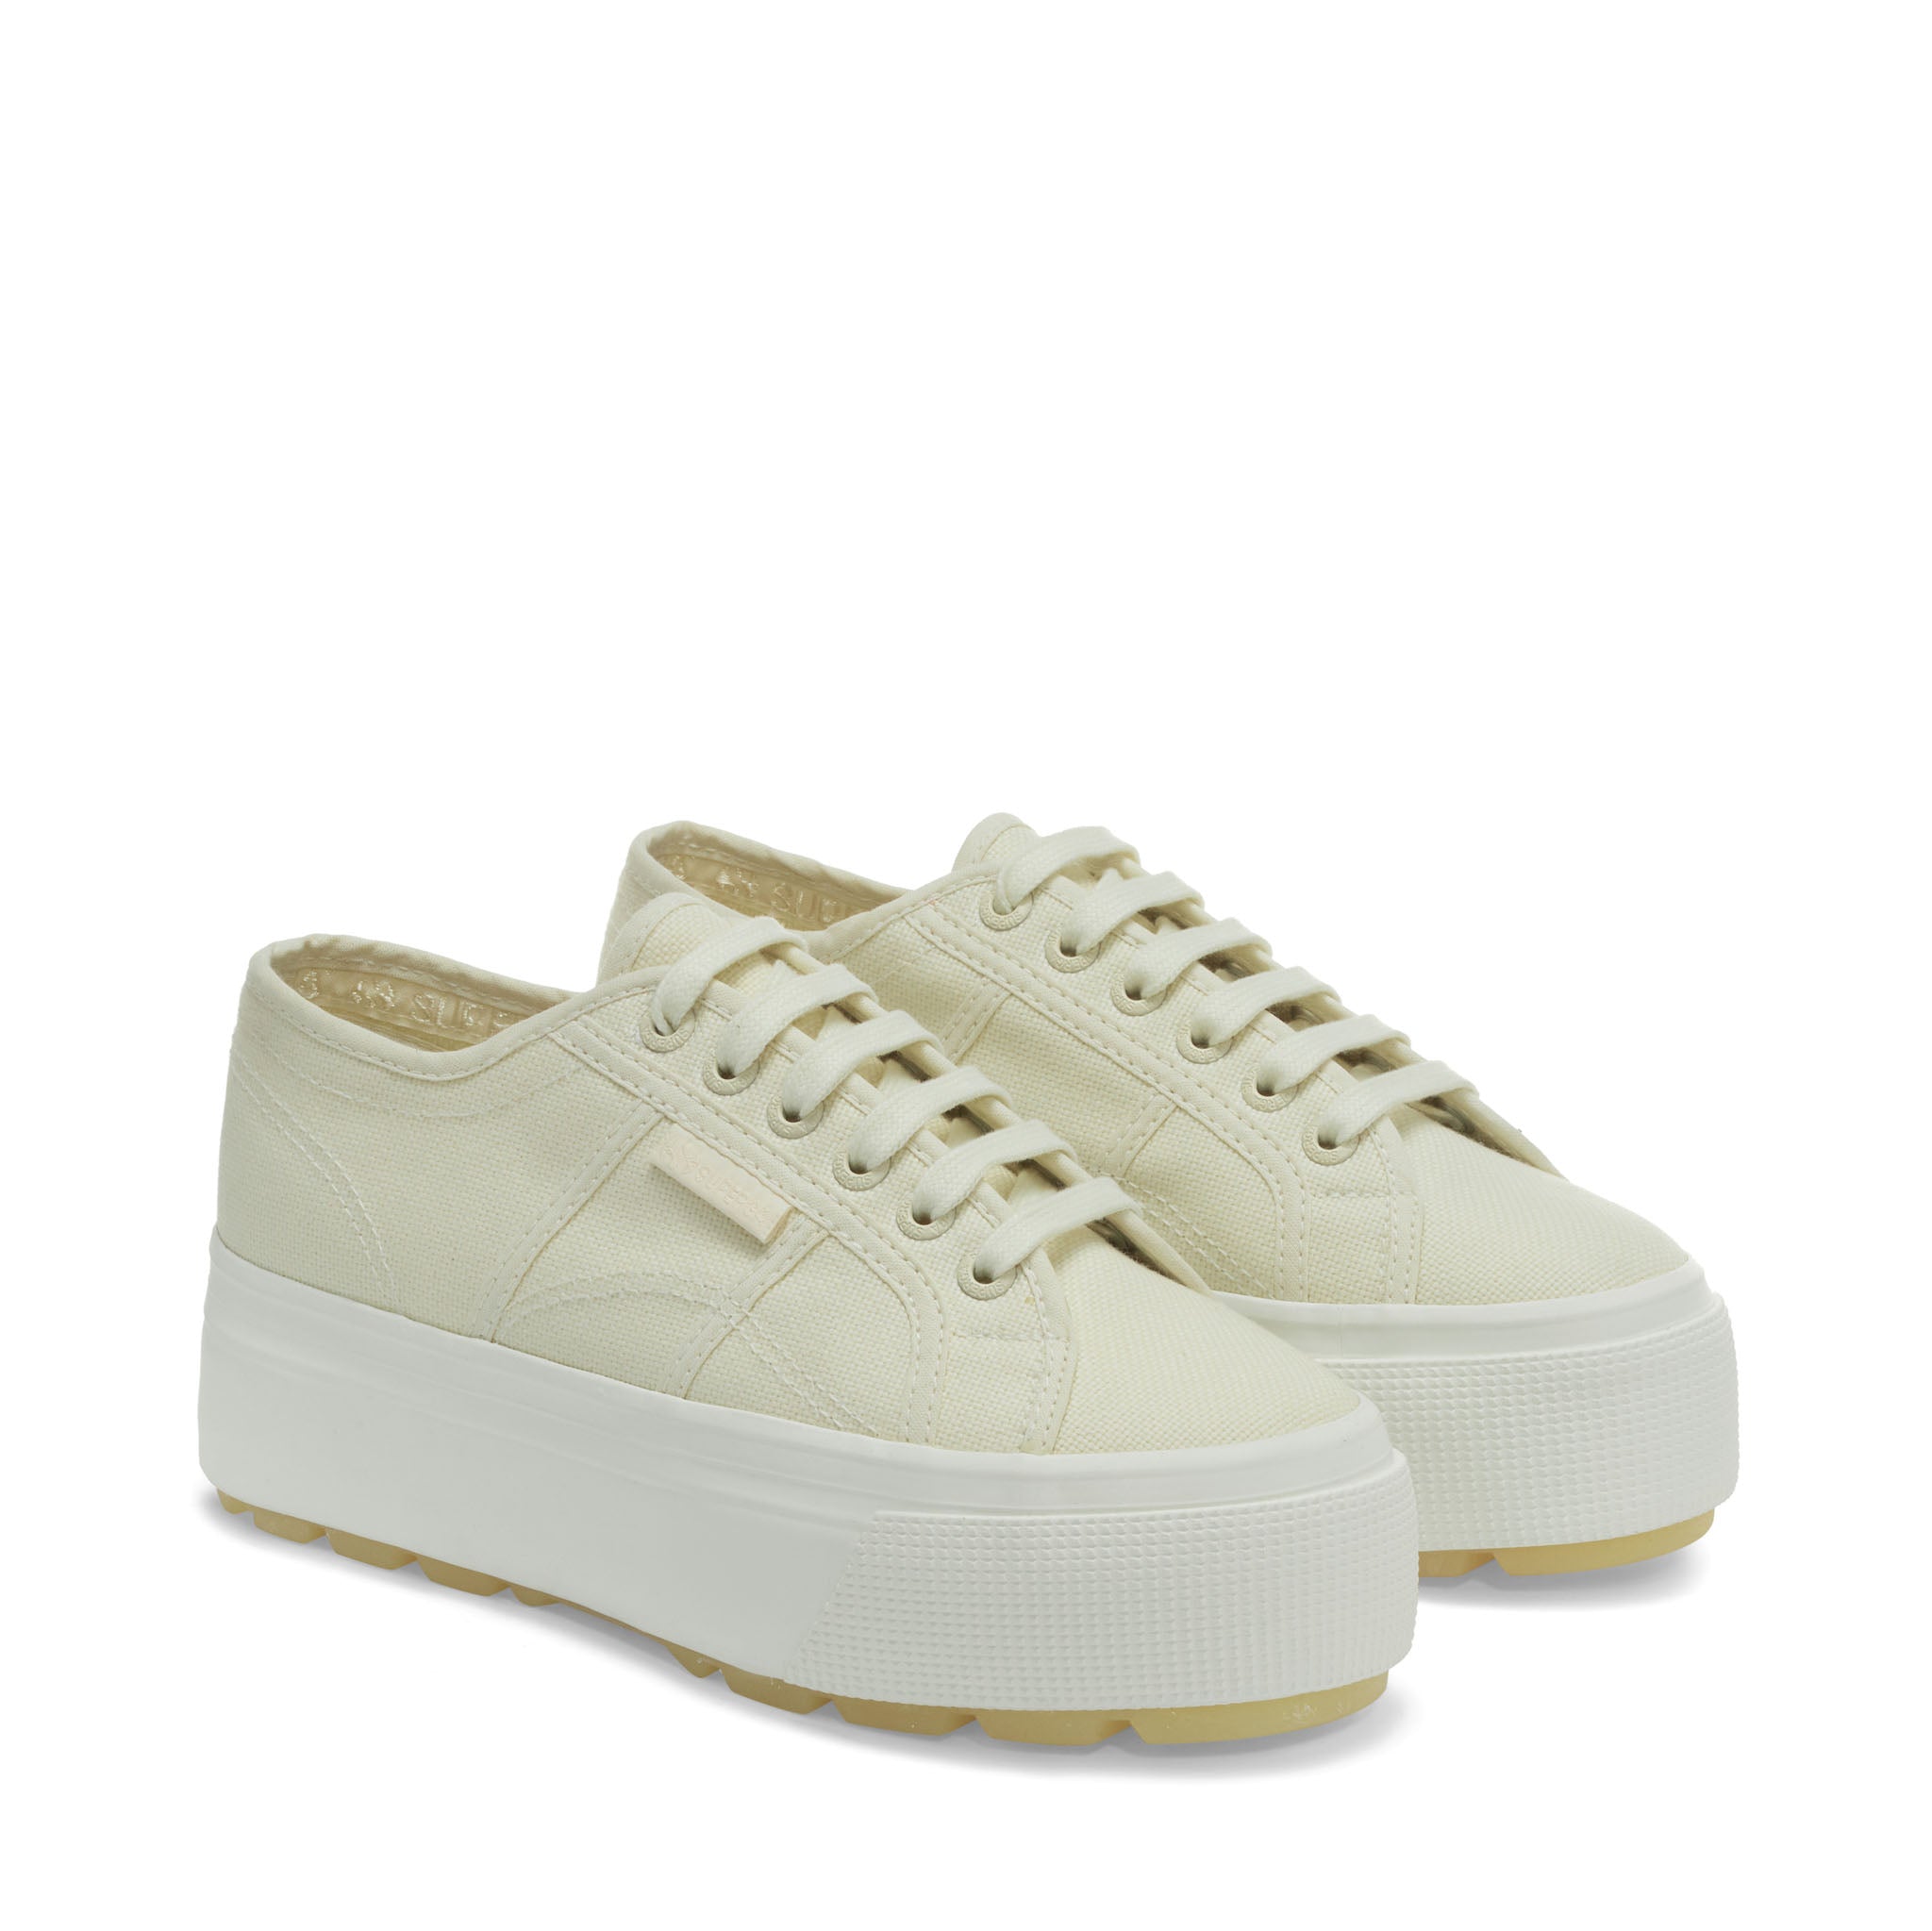 Superga 2790 Tank Sneakers - Eggshell. Front view.